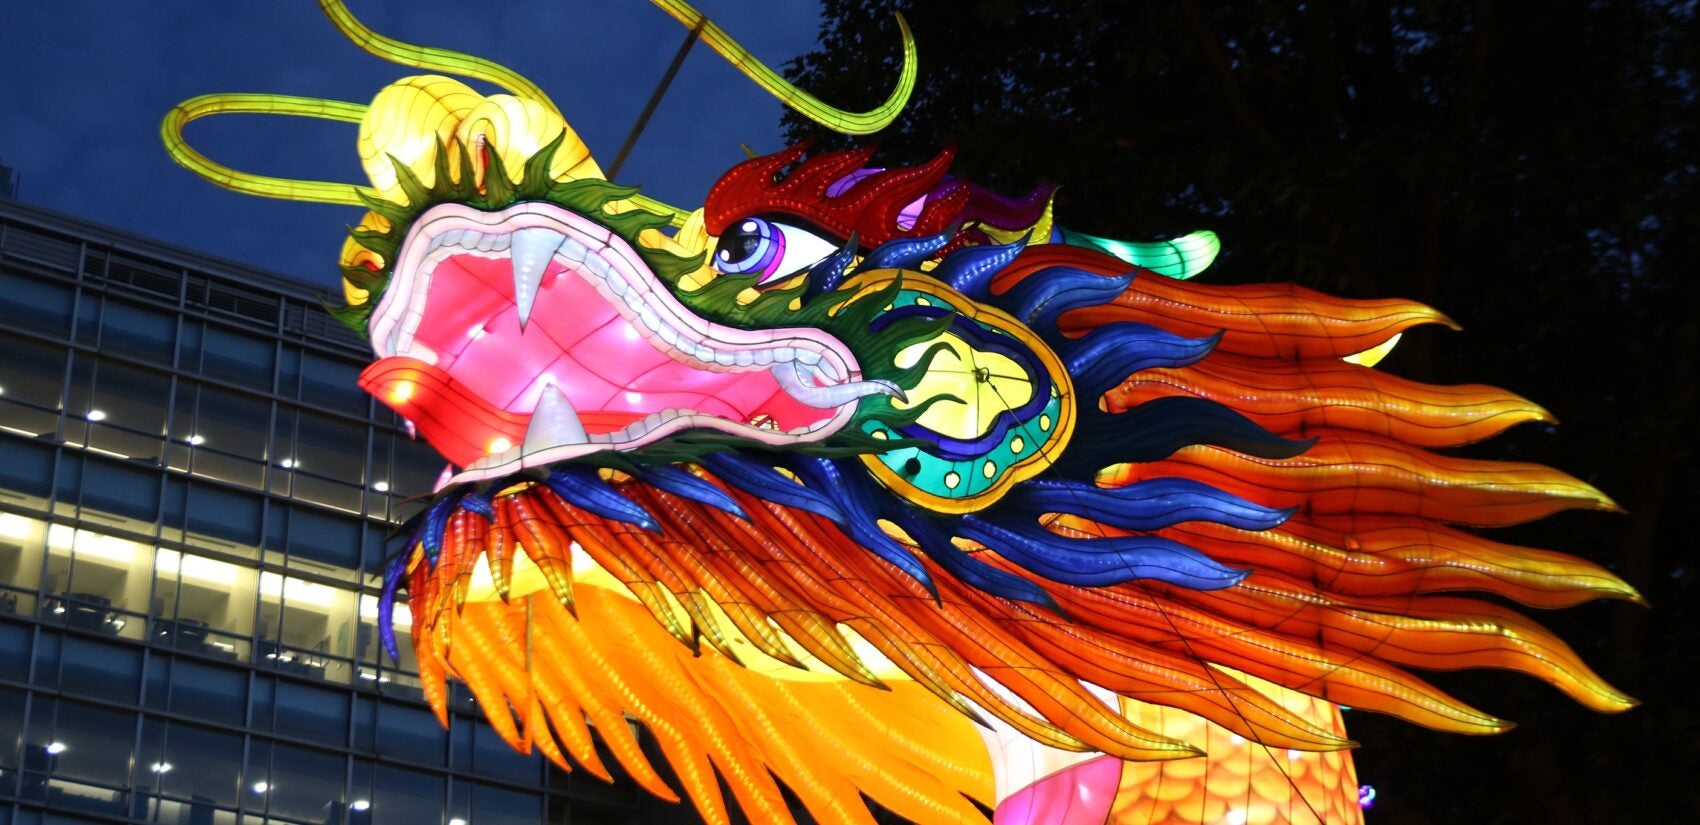 The head of the 164-foot-long dragon at the Chinese Lantern Festival was installed with a 15-person crew. (Cory Sharber/WHYY)